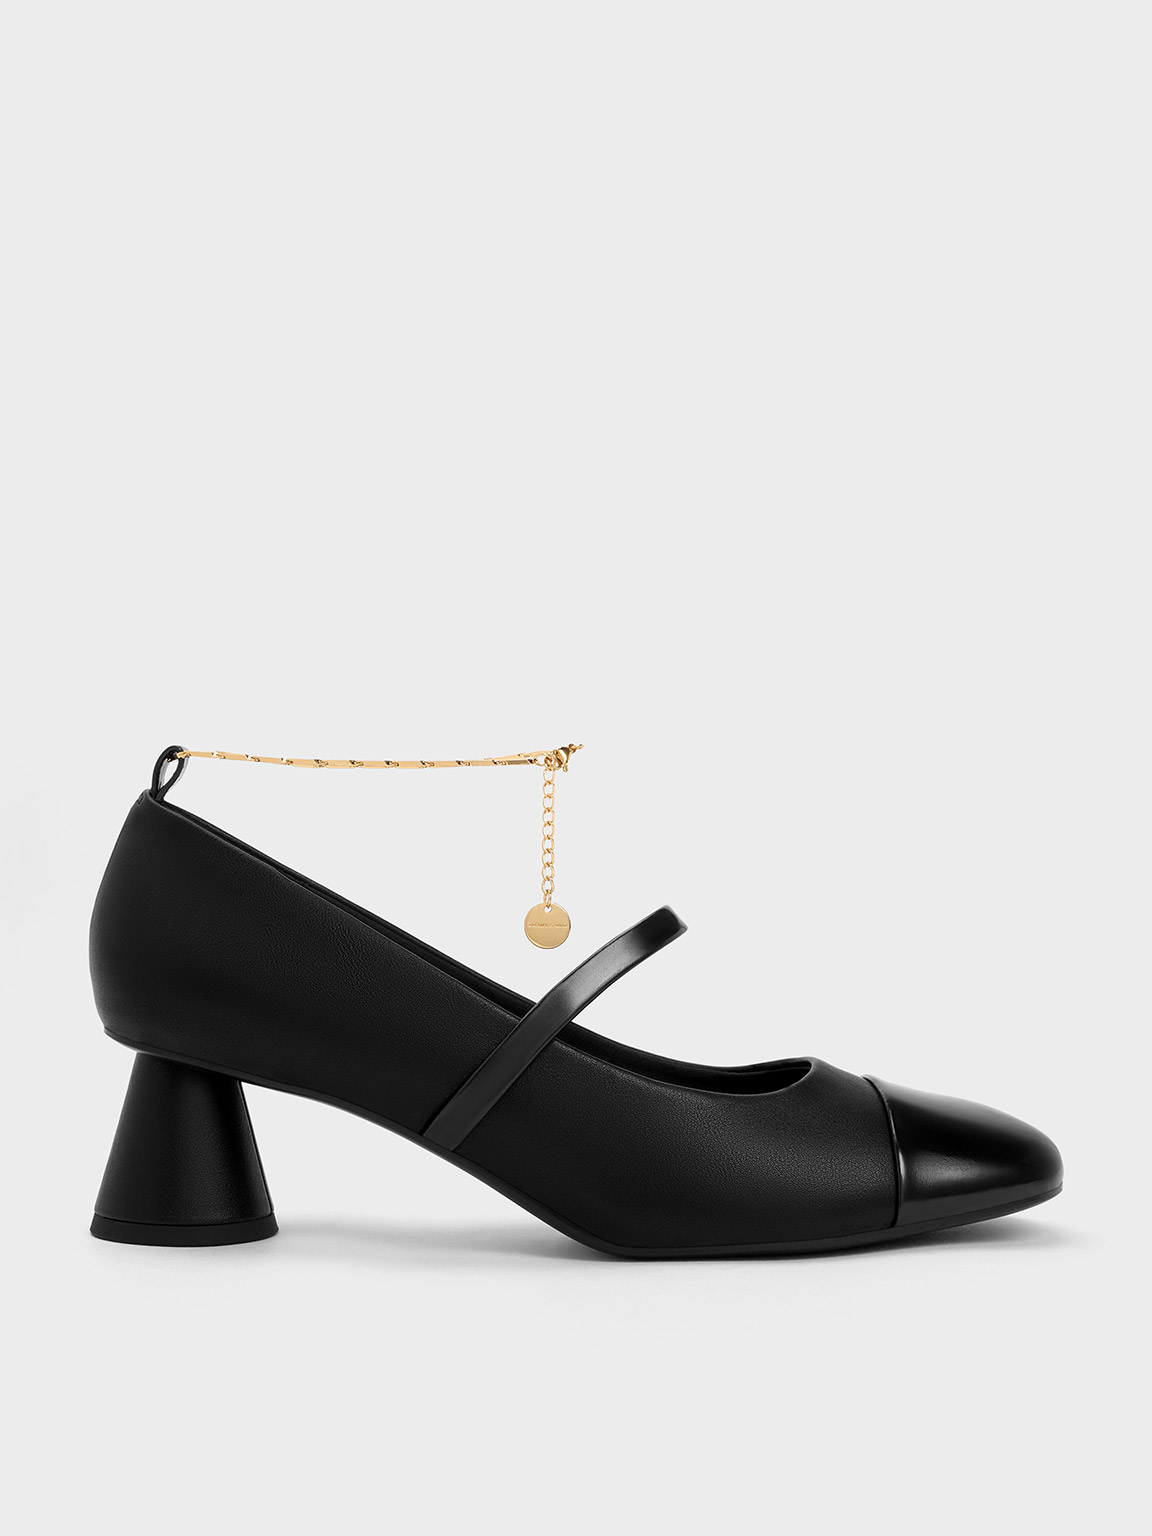 Black Delicate Chain-Link Mary Jane Pumps | CHARLES & KEITH UK